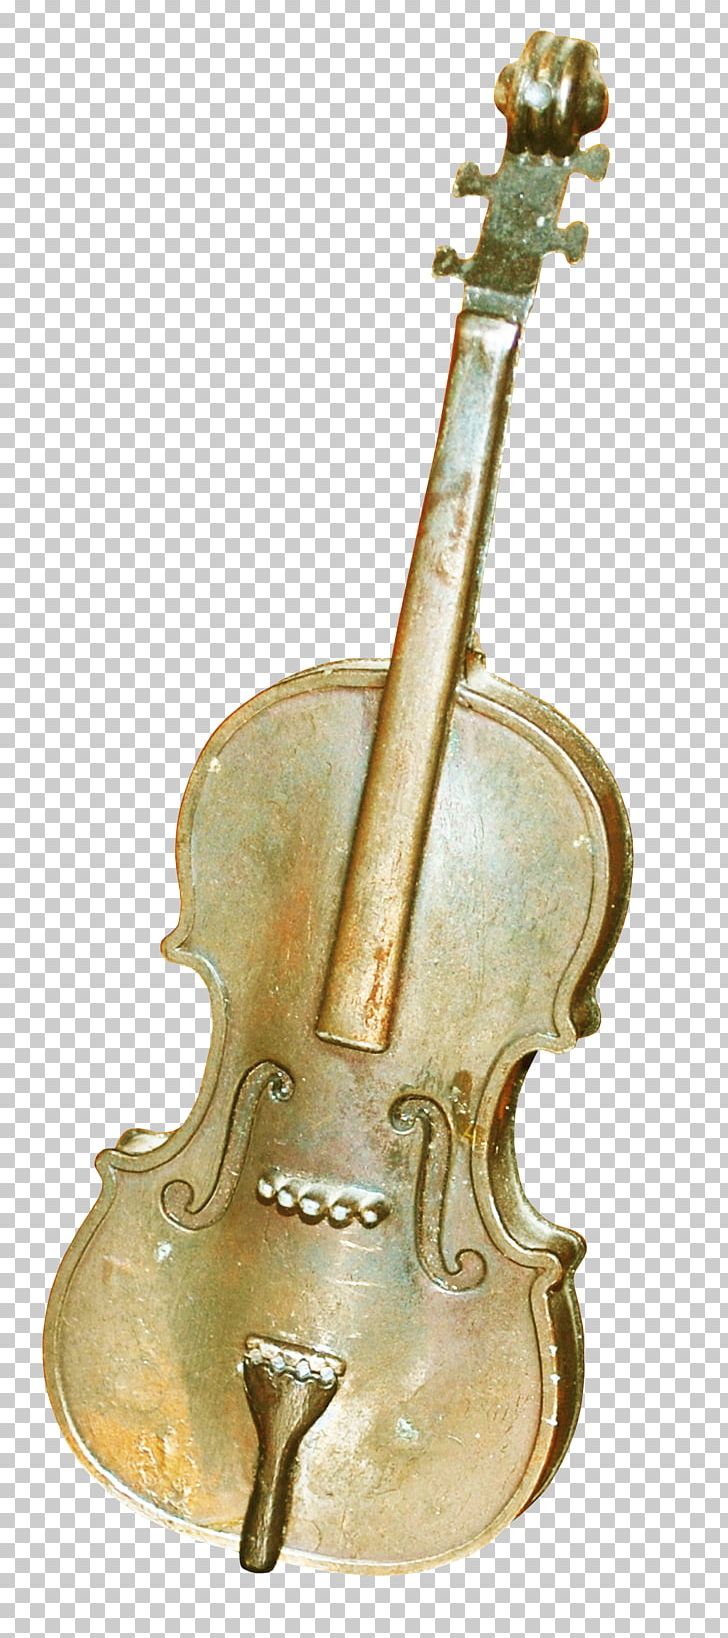 Musical Instrument Violin PNG, Clipart, Beautiful Violin, Bowed String Instrument, Brass, Cartoon Violin, Cello Free PNG Download